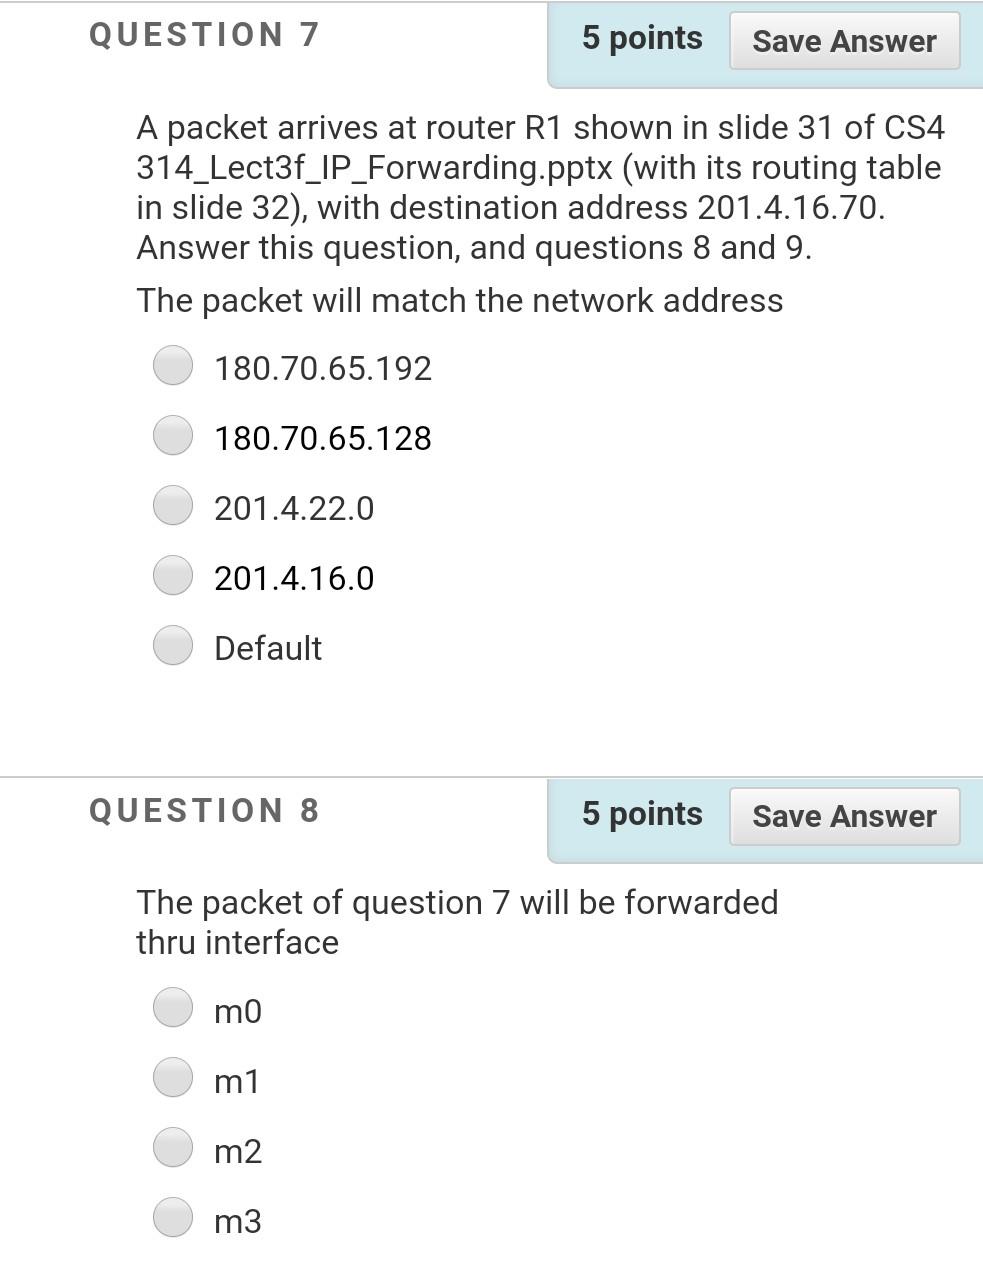 174.218.138.250 is a publicly routable IP address is it not?